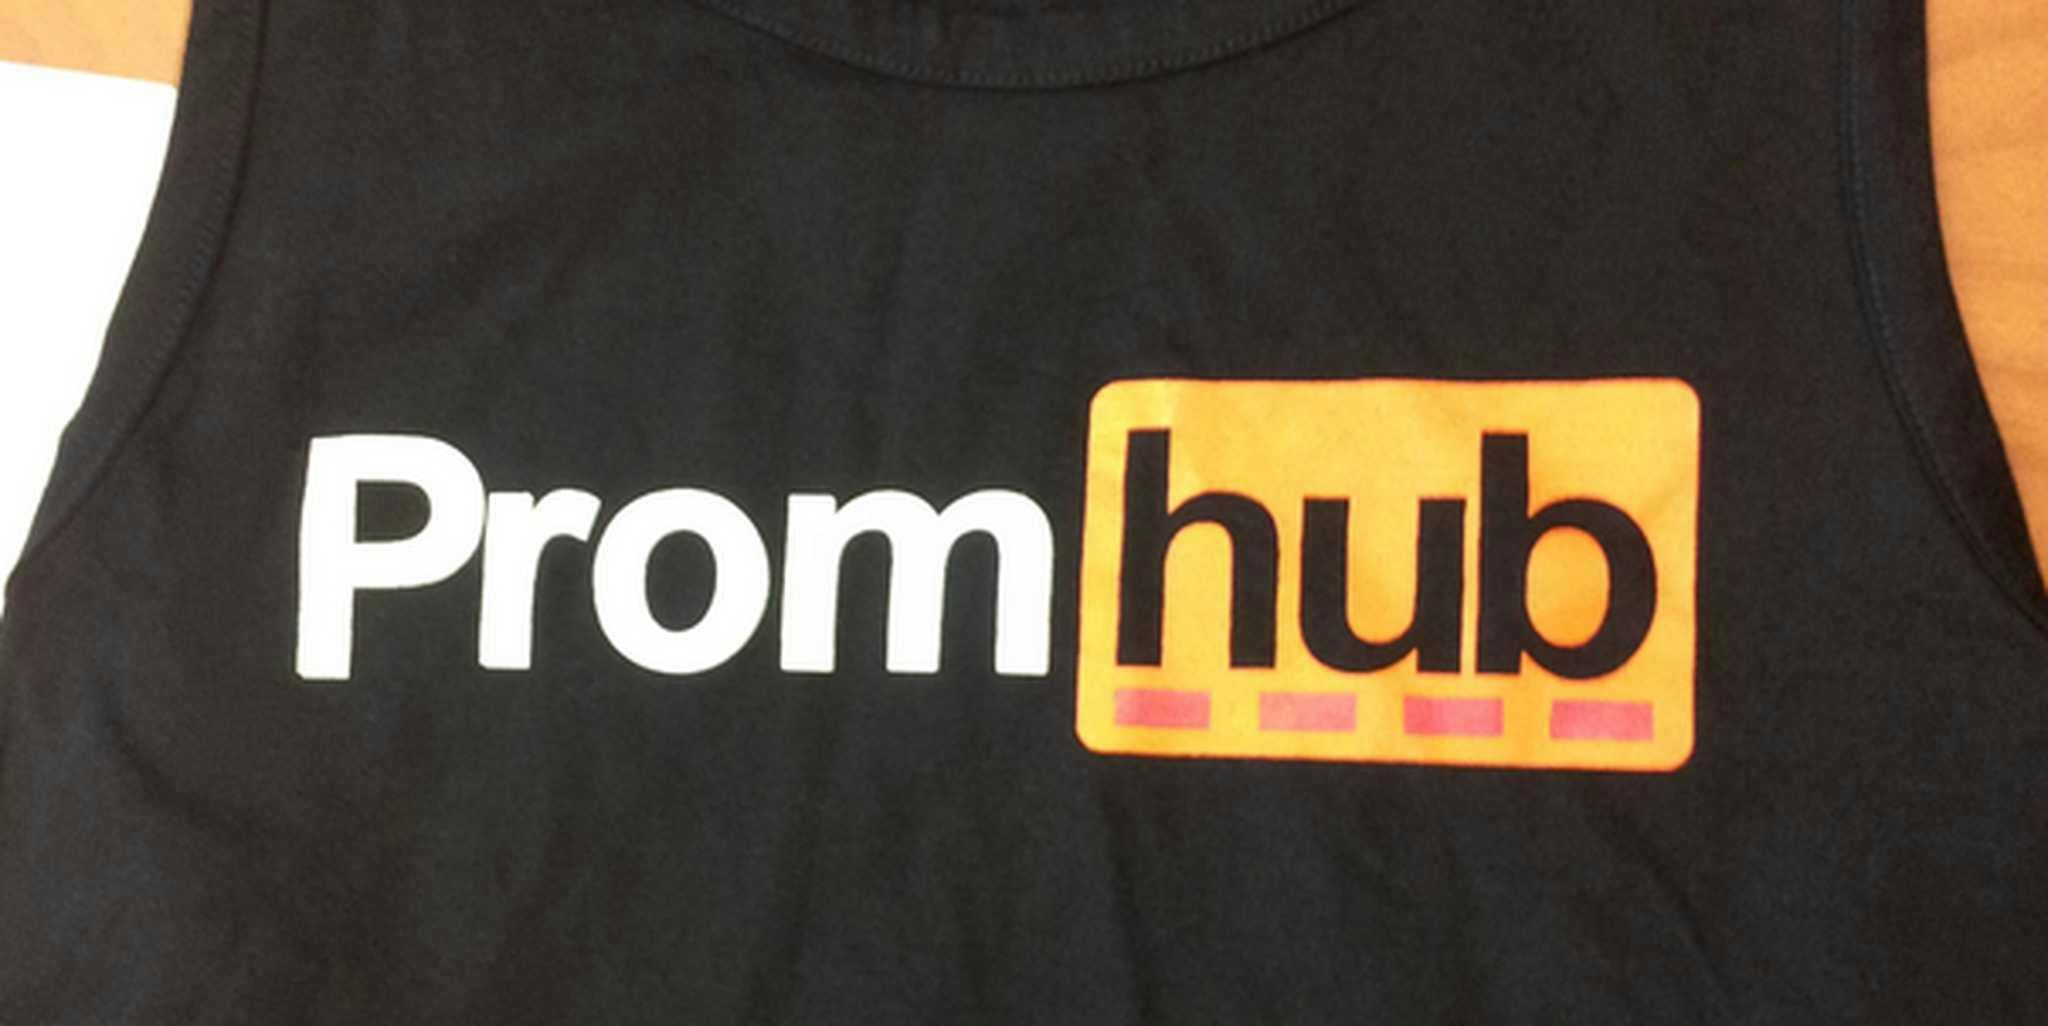 This high school's prom shirt was inspired by a huge porn site